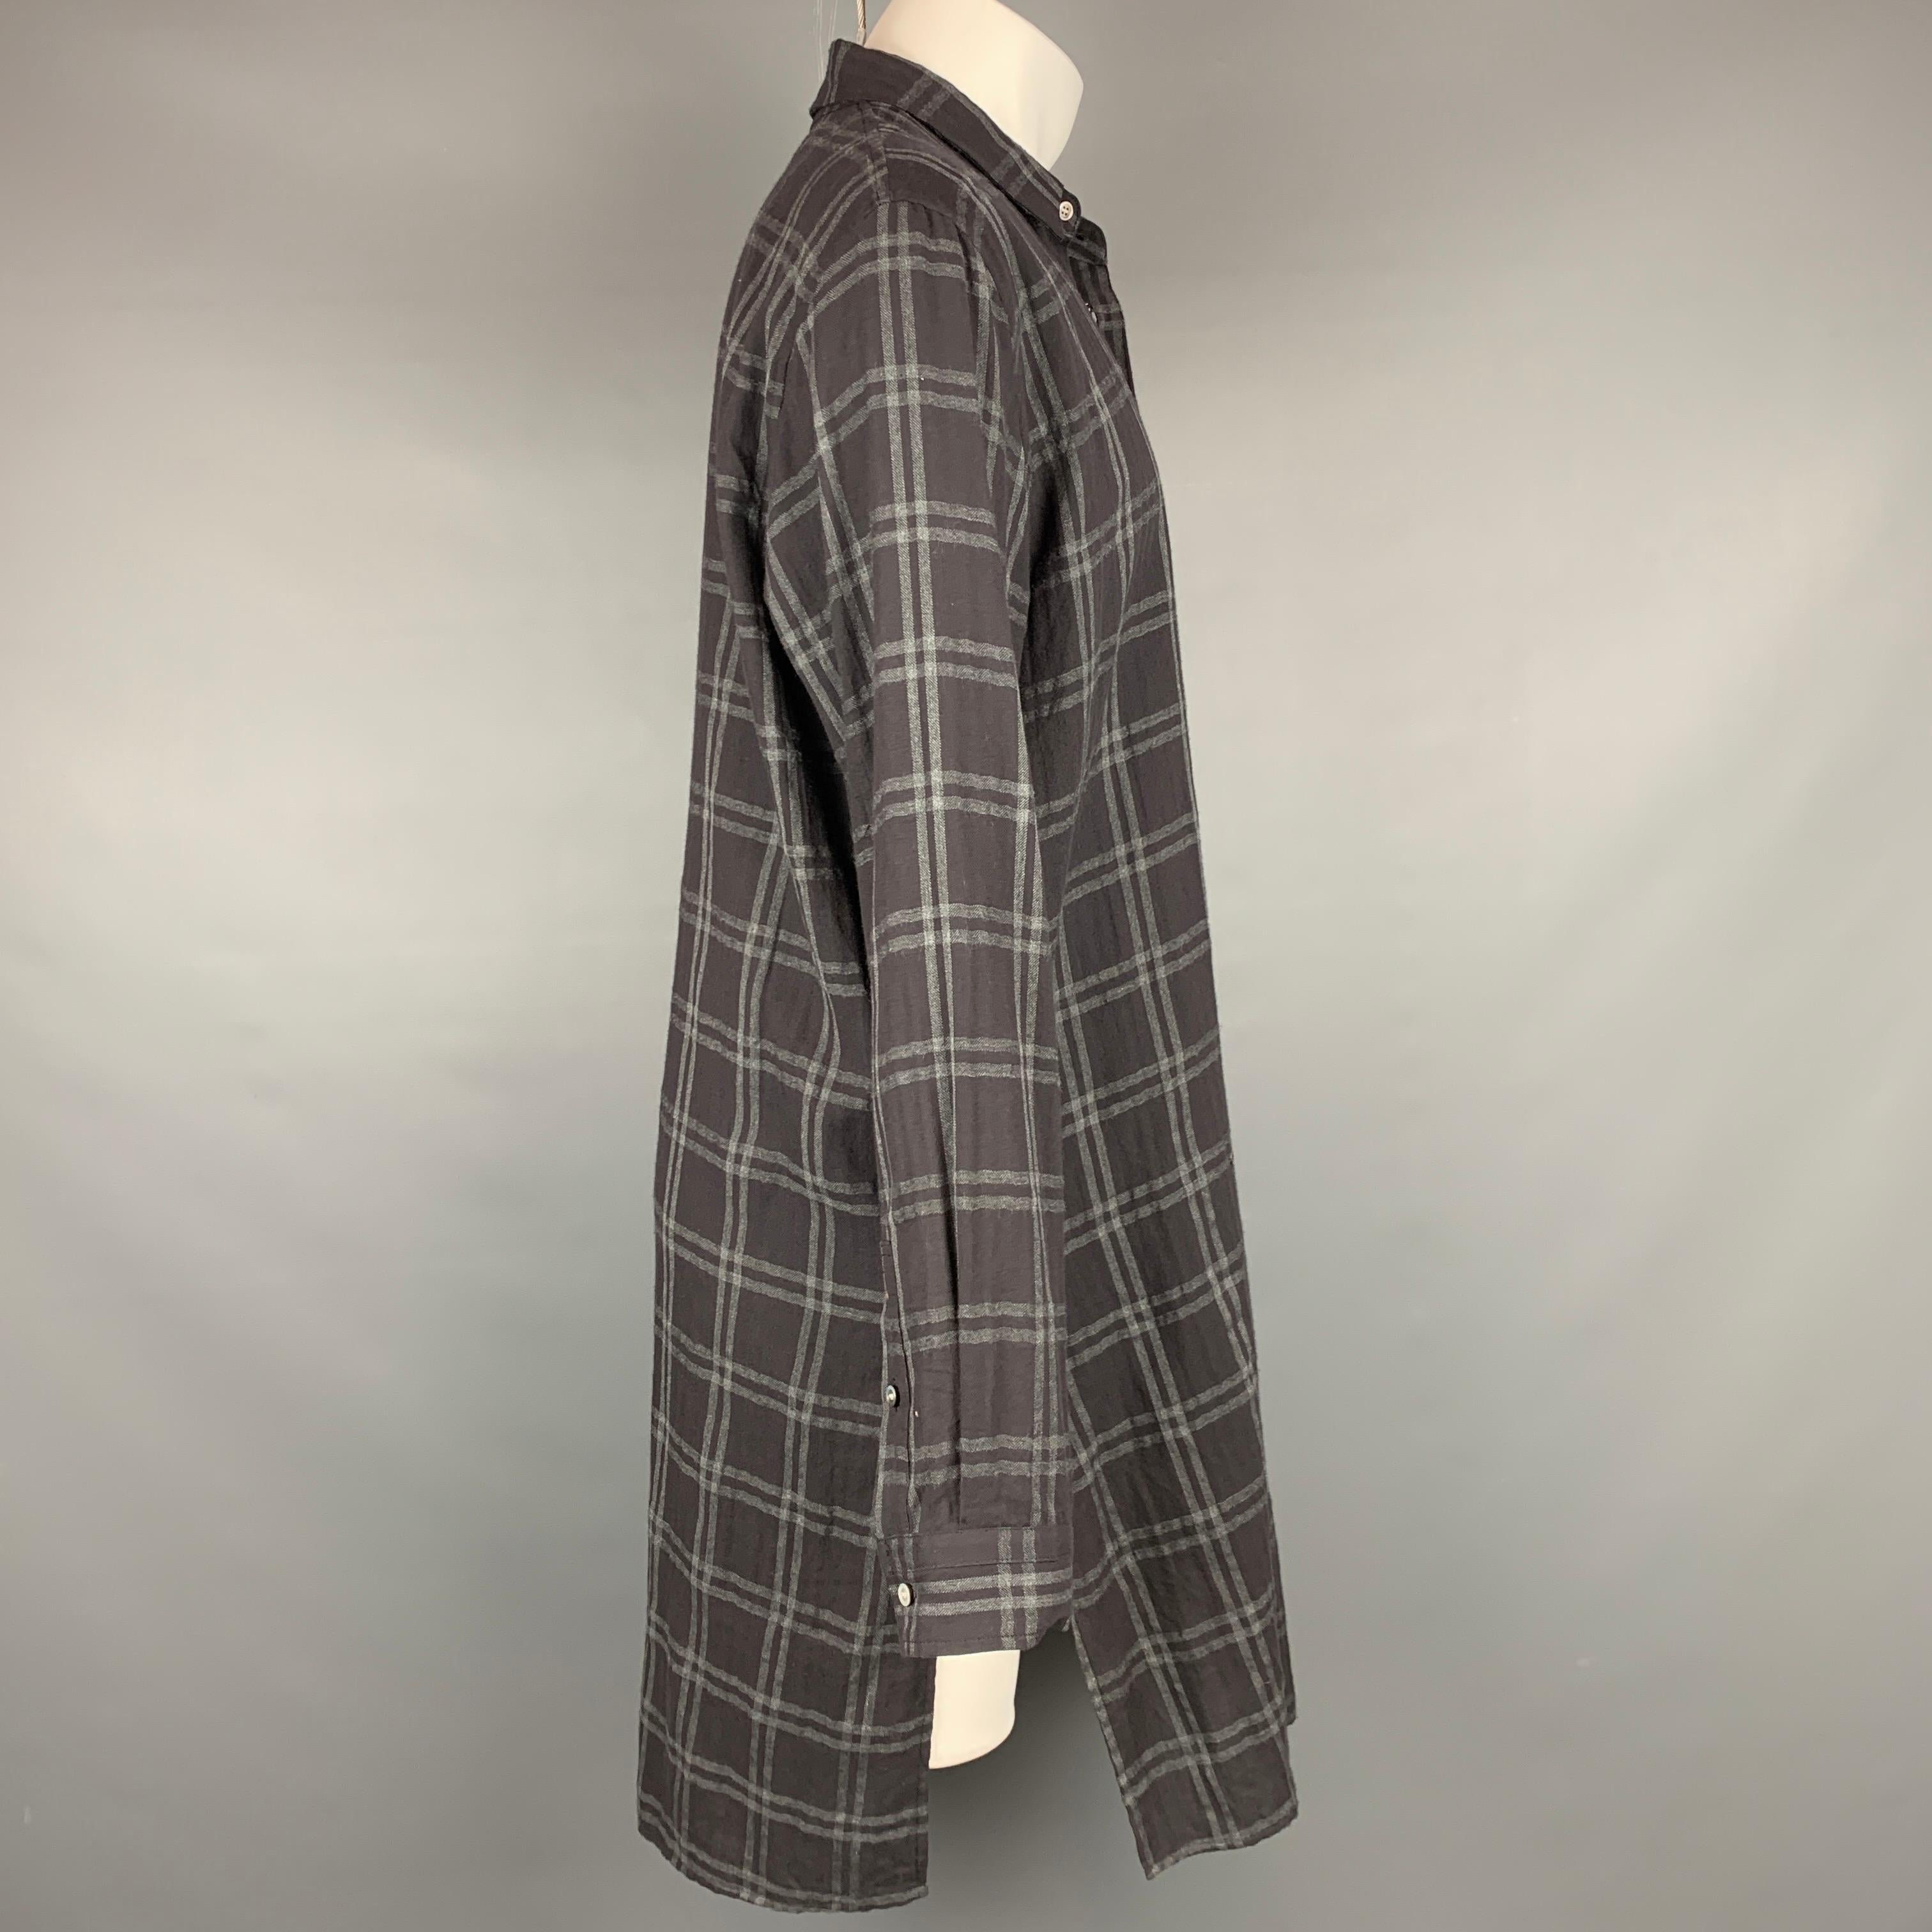 ROBERT GELLER long sleeve shirt comes in a charcoal & grey plaid cotton featuring a button up style, patch pocket, and a spread collar. Made in Japan.

Very Good Pre-Owned Condition.
Marked: 52

Measurements:

Shoulder: 19.5 in.
Chest: 50